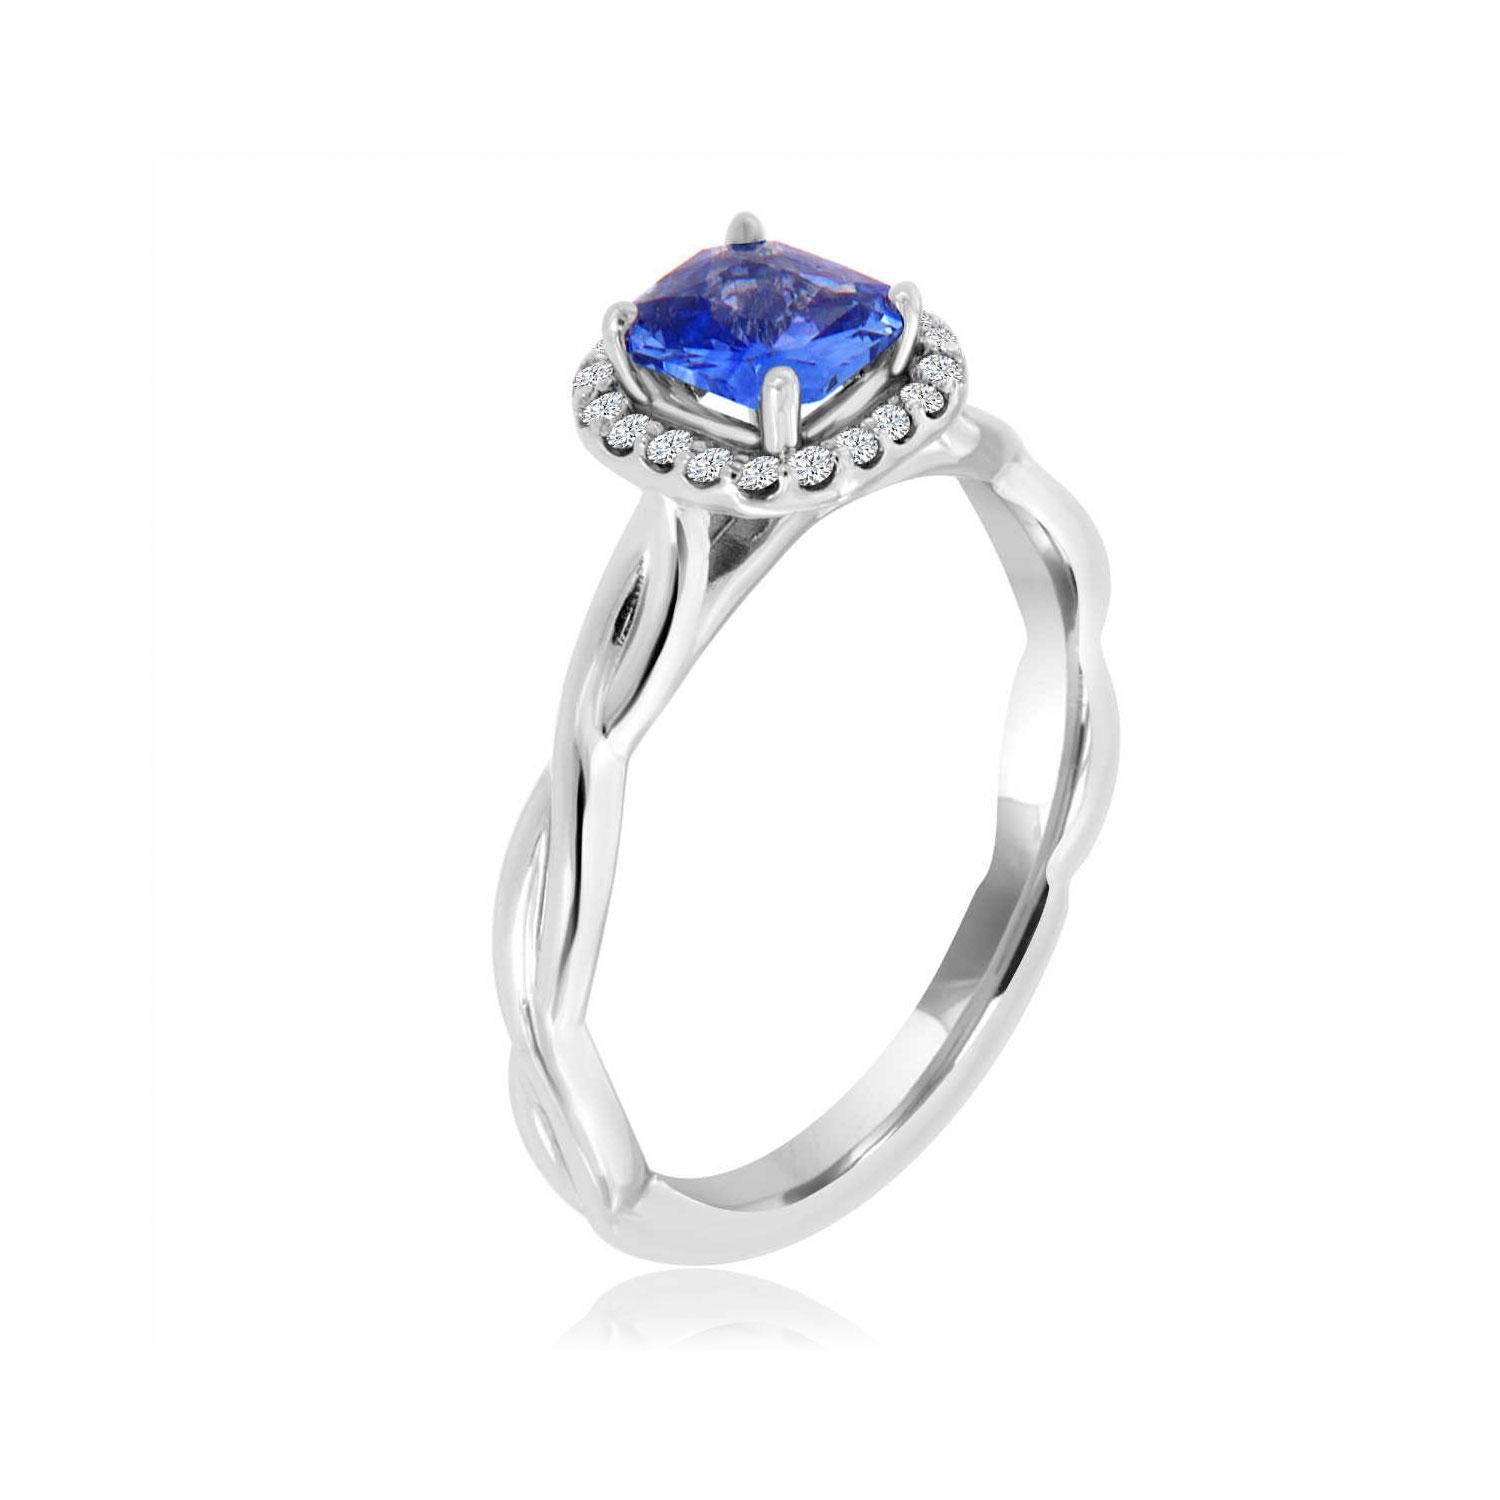 This infinity style ring features a 0.75 - carat square radiant Sri Lankan Light Blue Sapphire encircled by a halo of round melee diamonds. Experience the difference in person!

Product details: 

Center Gemstone Type: SAPPHIRE
Center Gemstone Carat